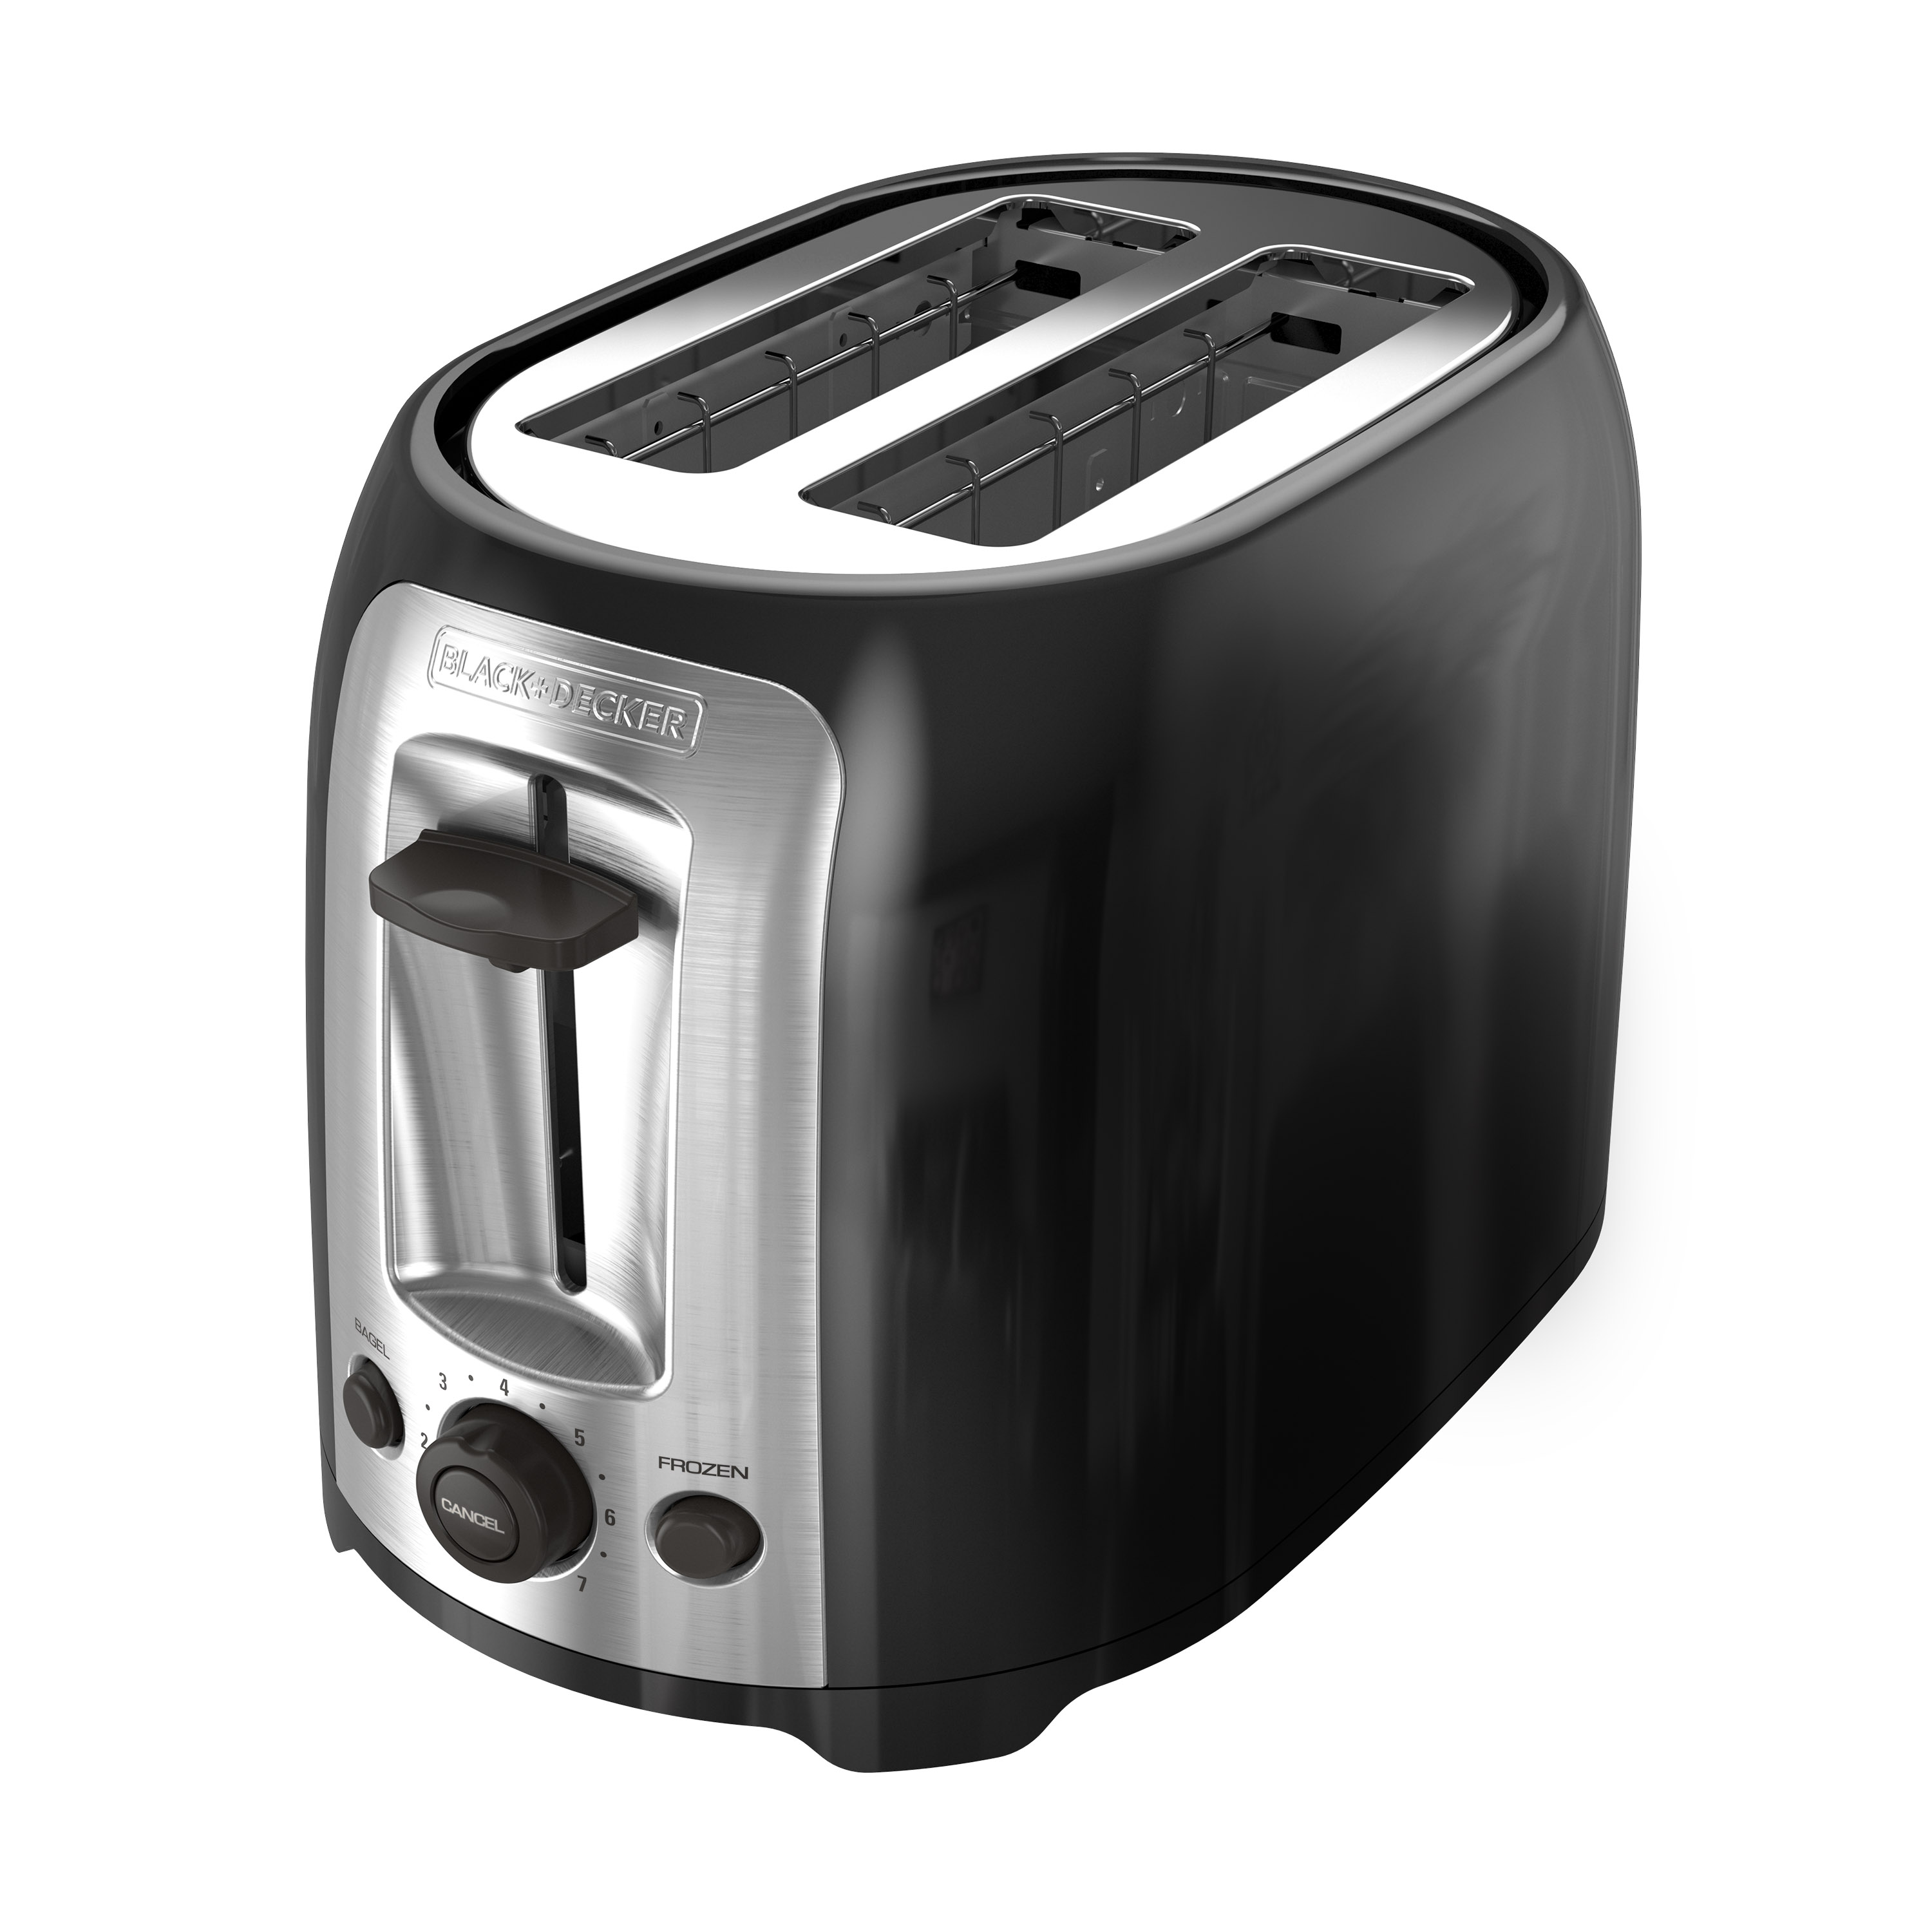 Black+Decker Honeycomb Collection 4-Slice Toaster with Premium Textured  Finish, TR1450WD, White